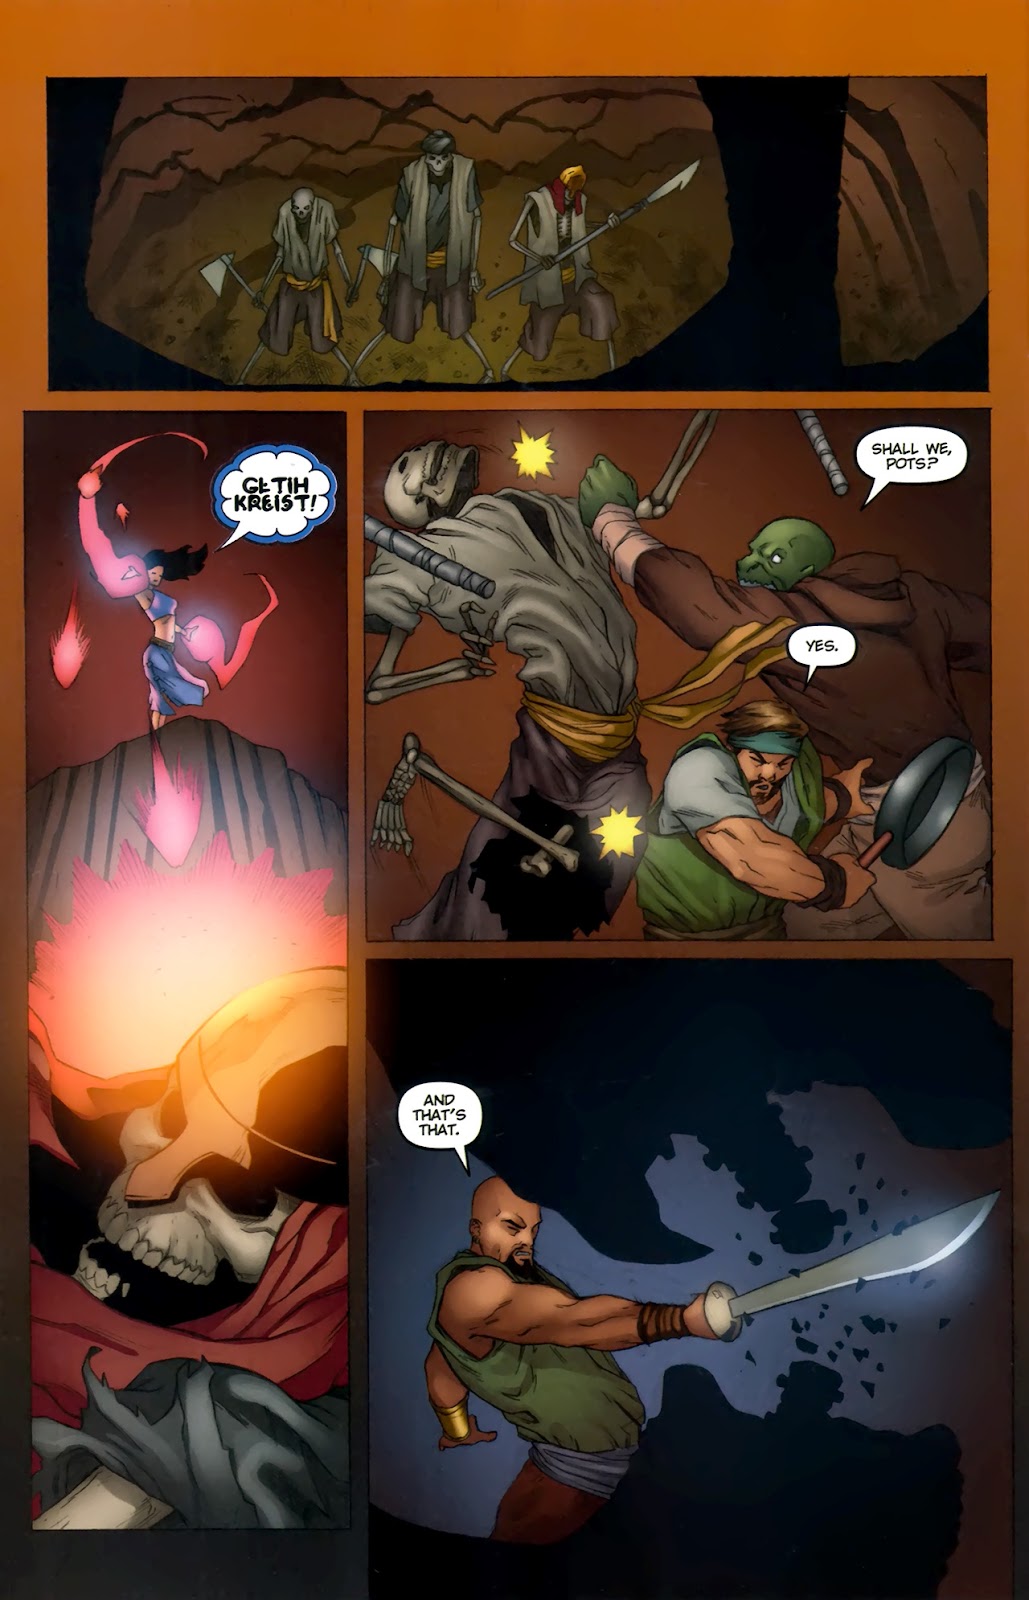 1001 Arabian Nights: The Adventures of Sinbad issue 11 - Page 22